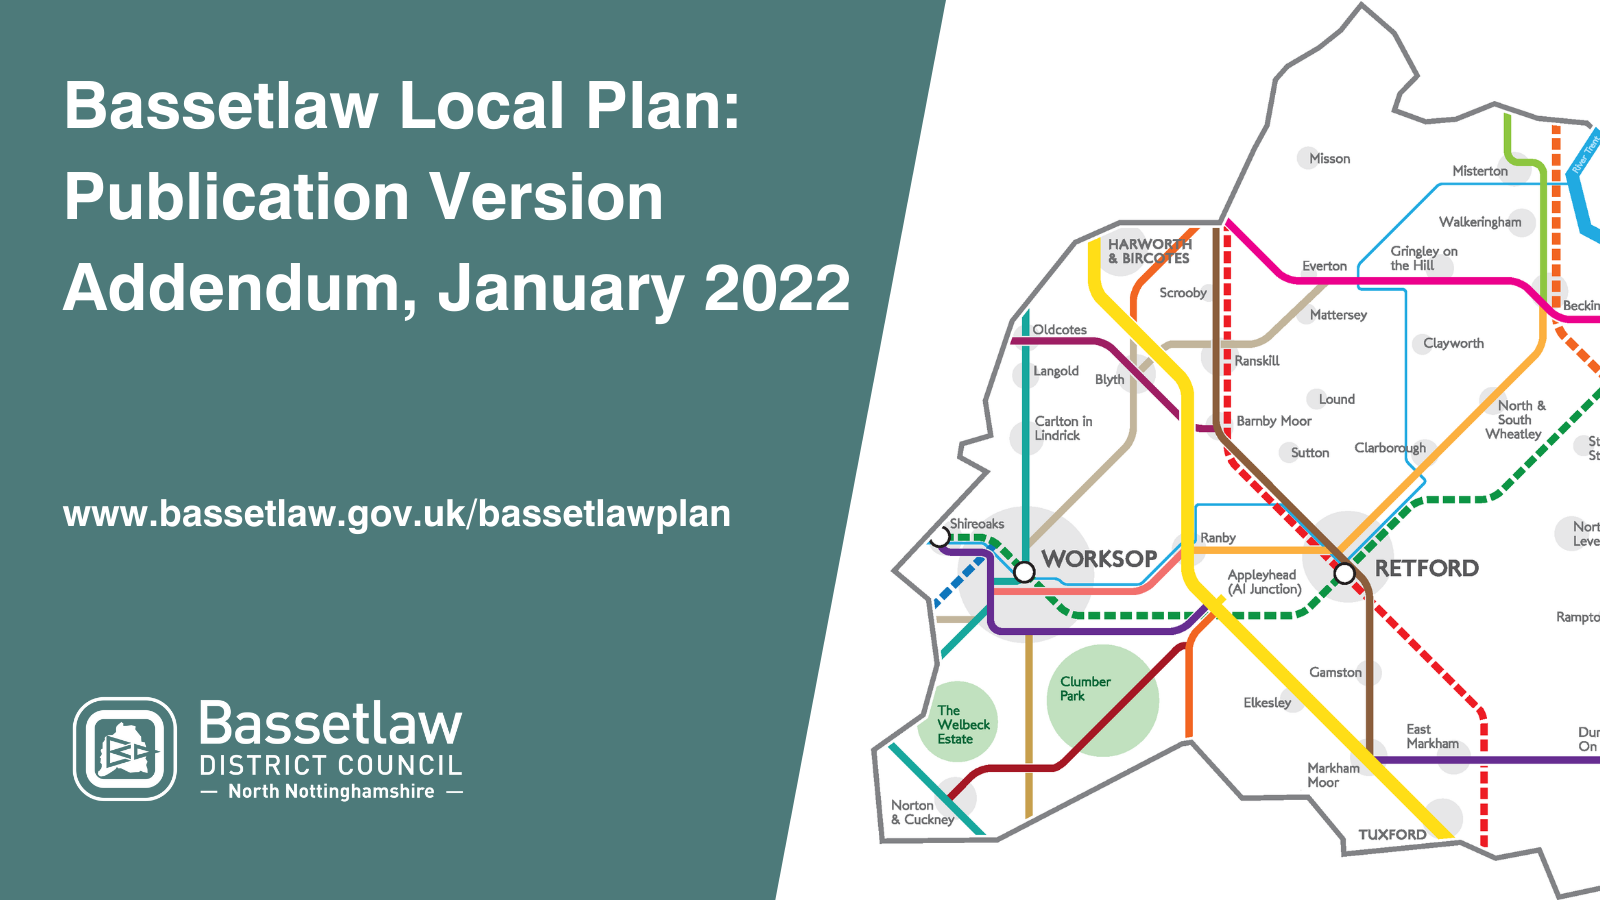 Comments sought on Local Plan update